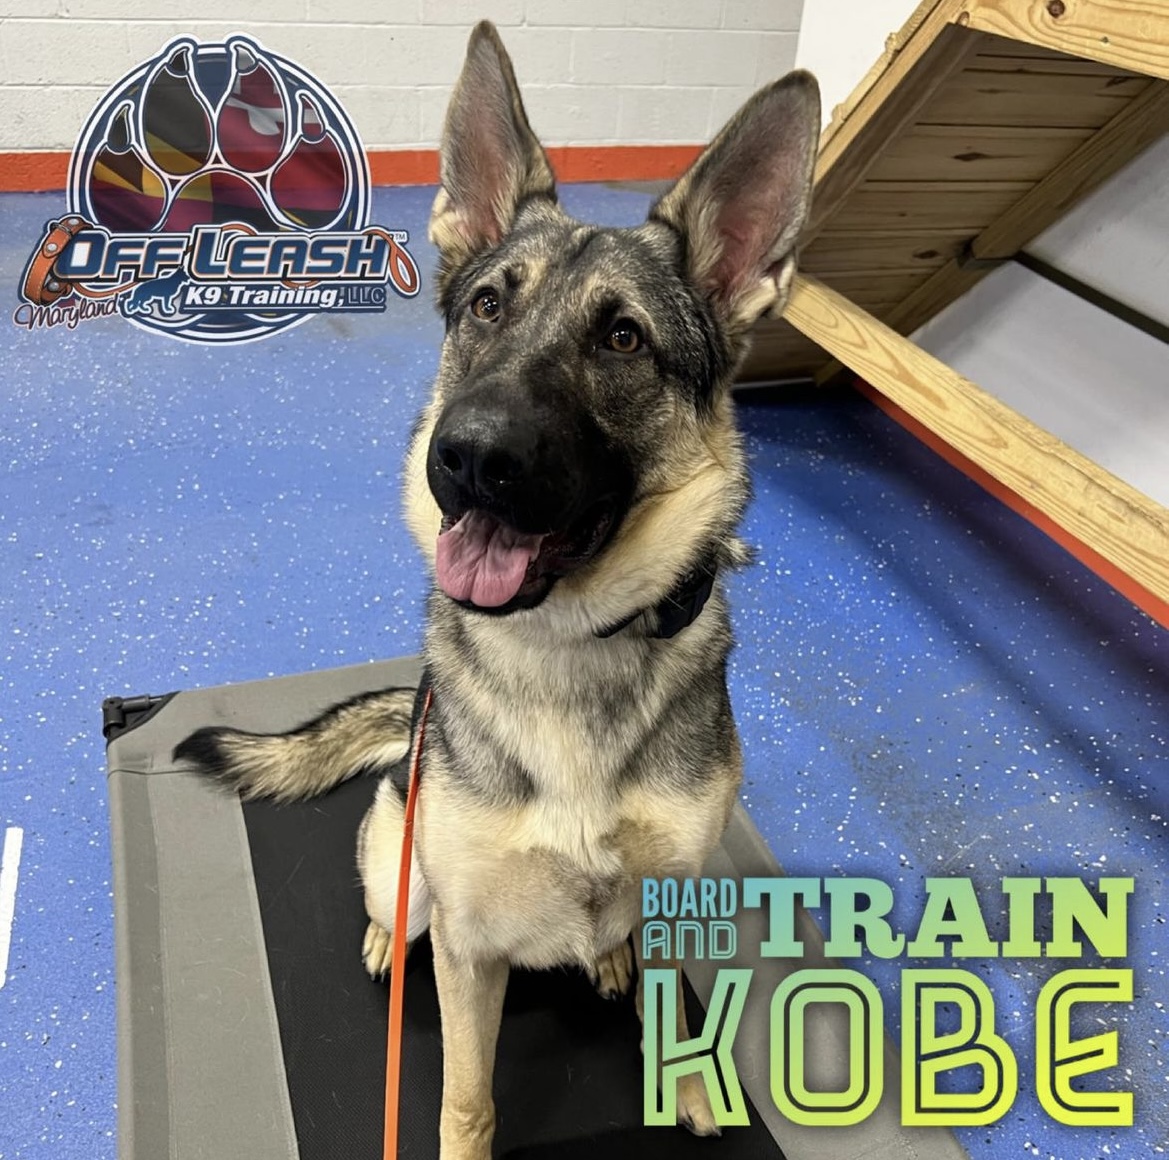 Dog named Kobe who completed our canine board and train program